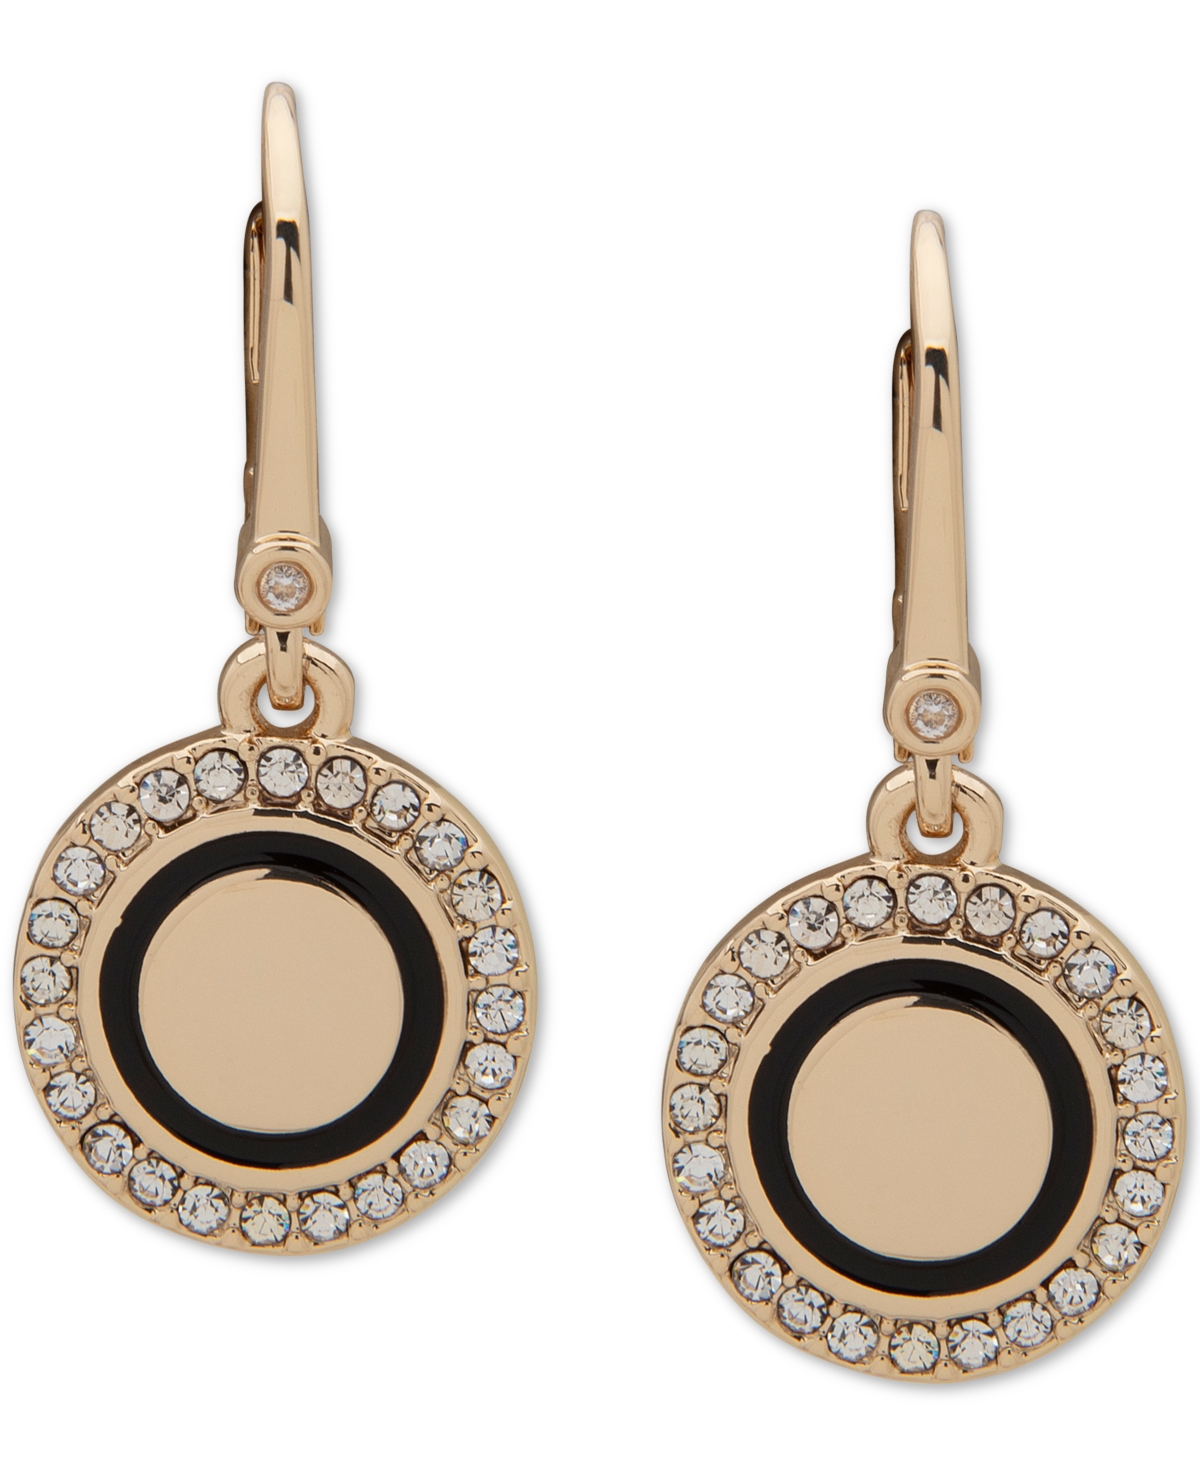 Gold-Tone Pave & Colored Circle Drop Earrings - Gold